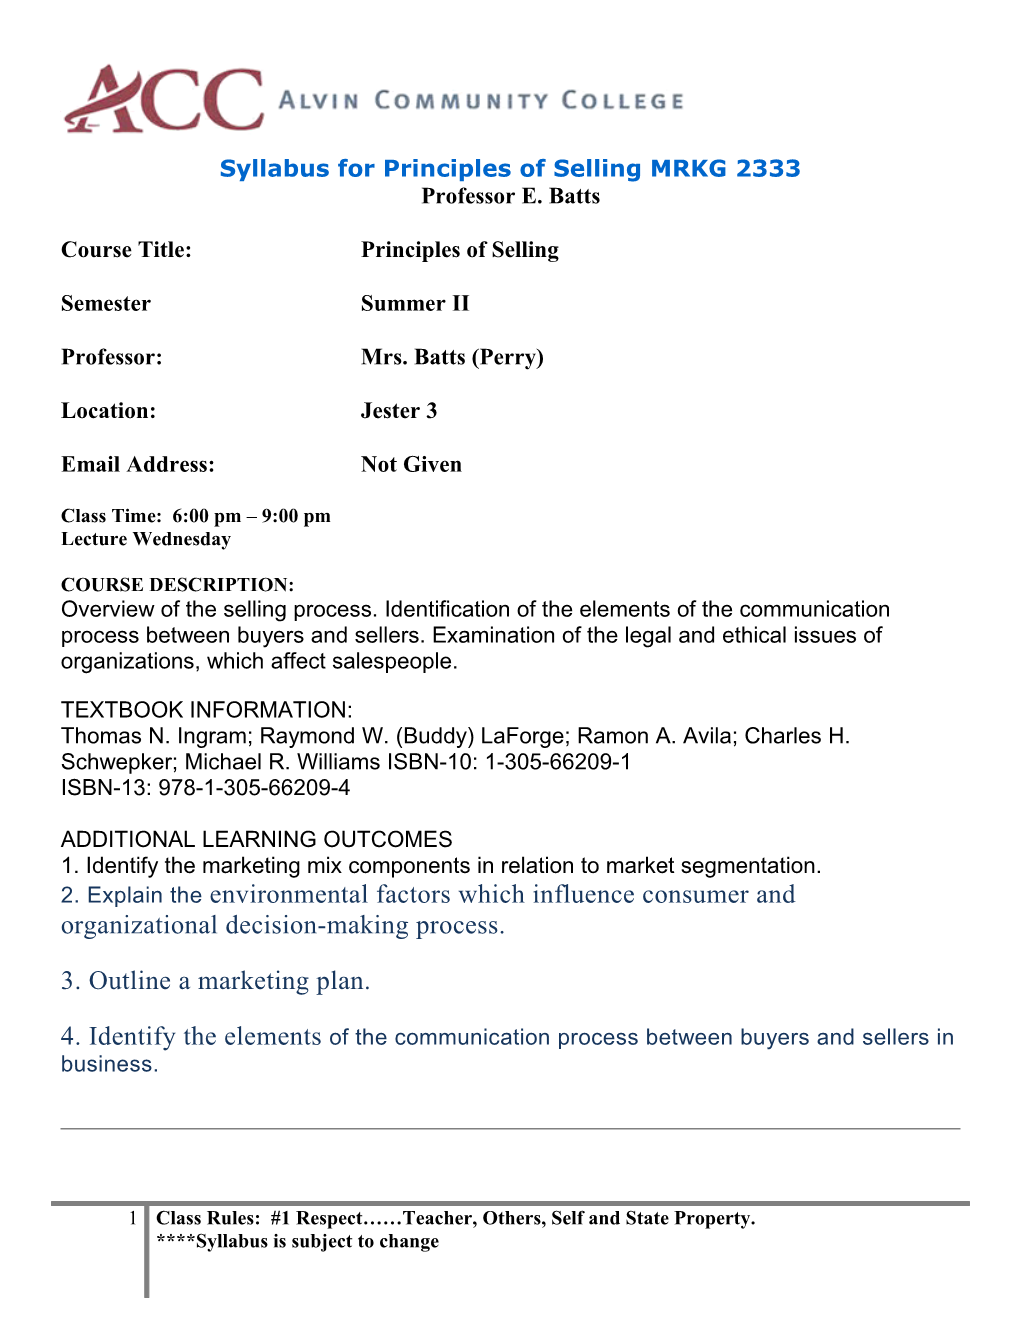 Syllabus for Principles of Selling MRKG 2333